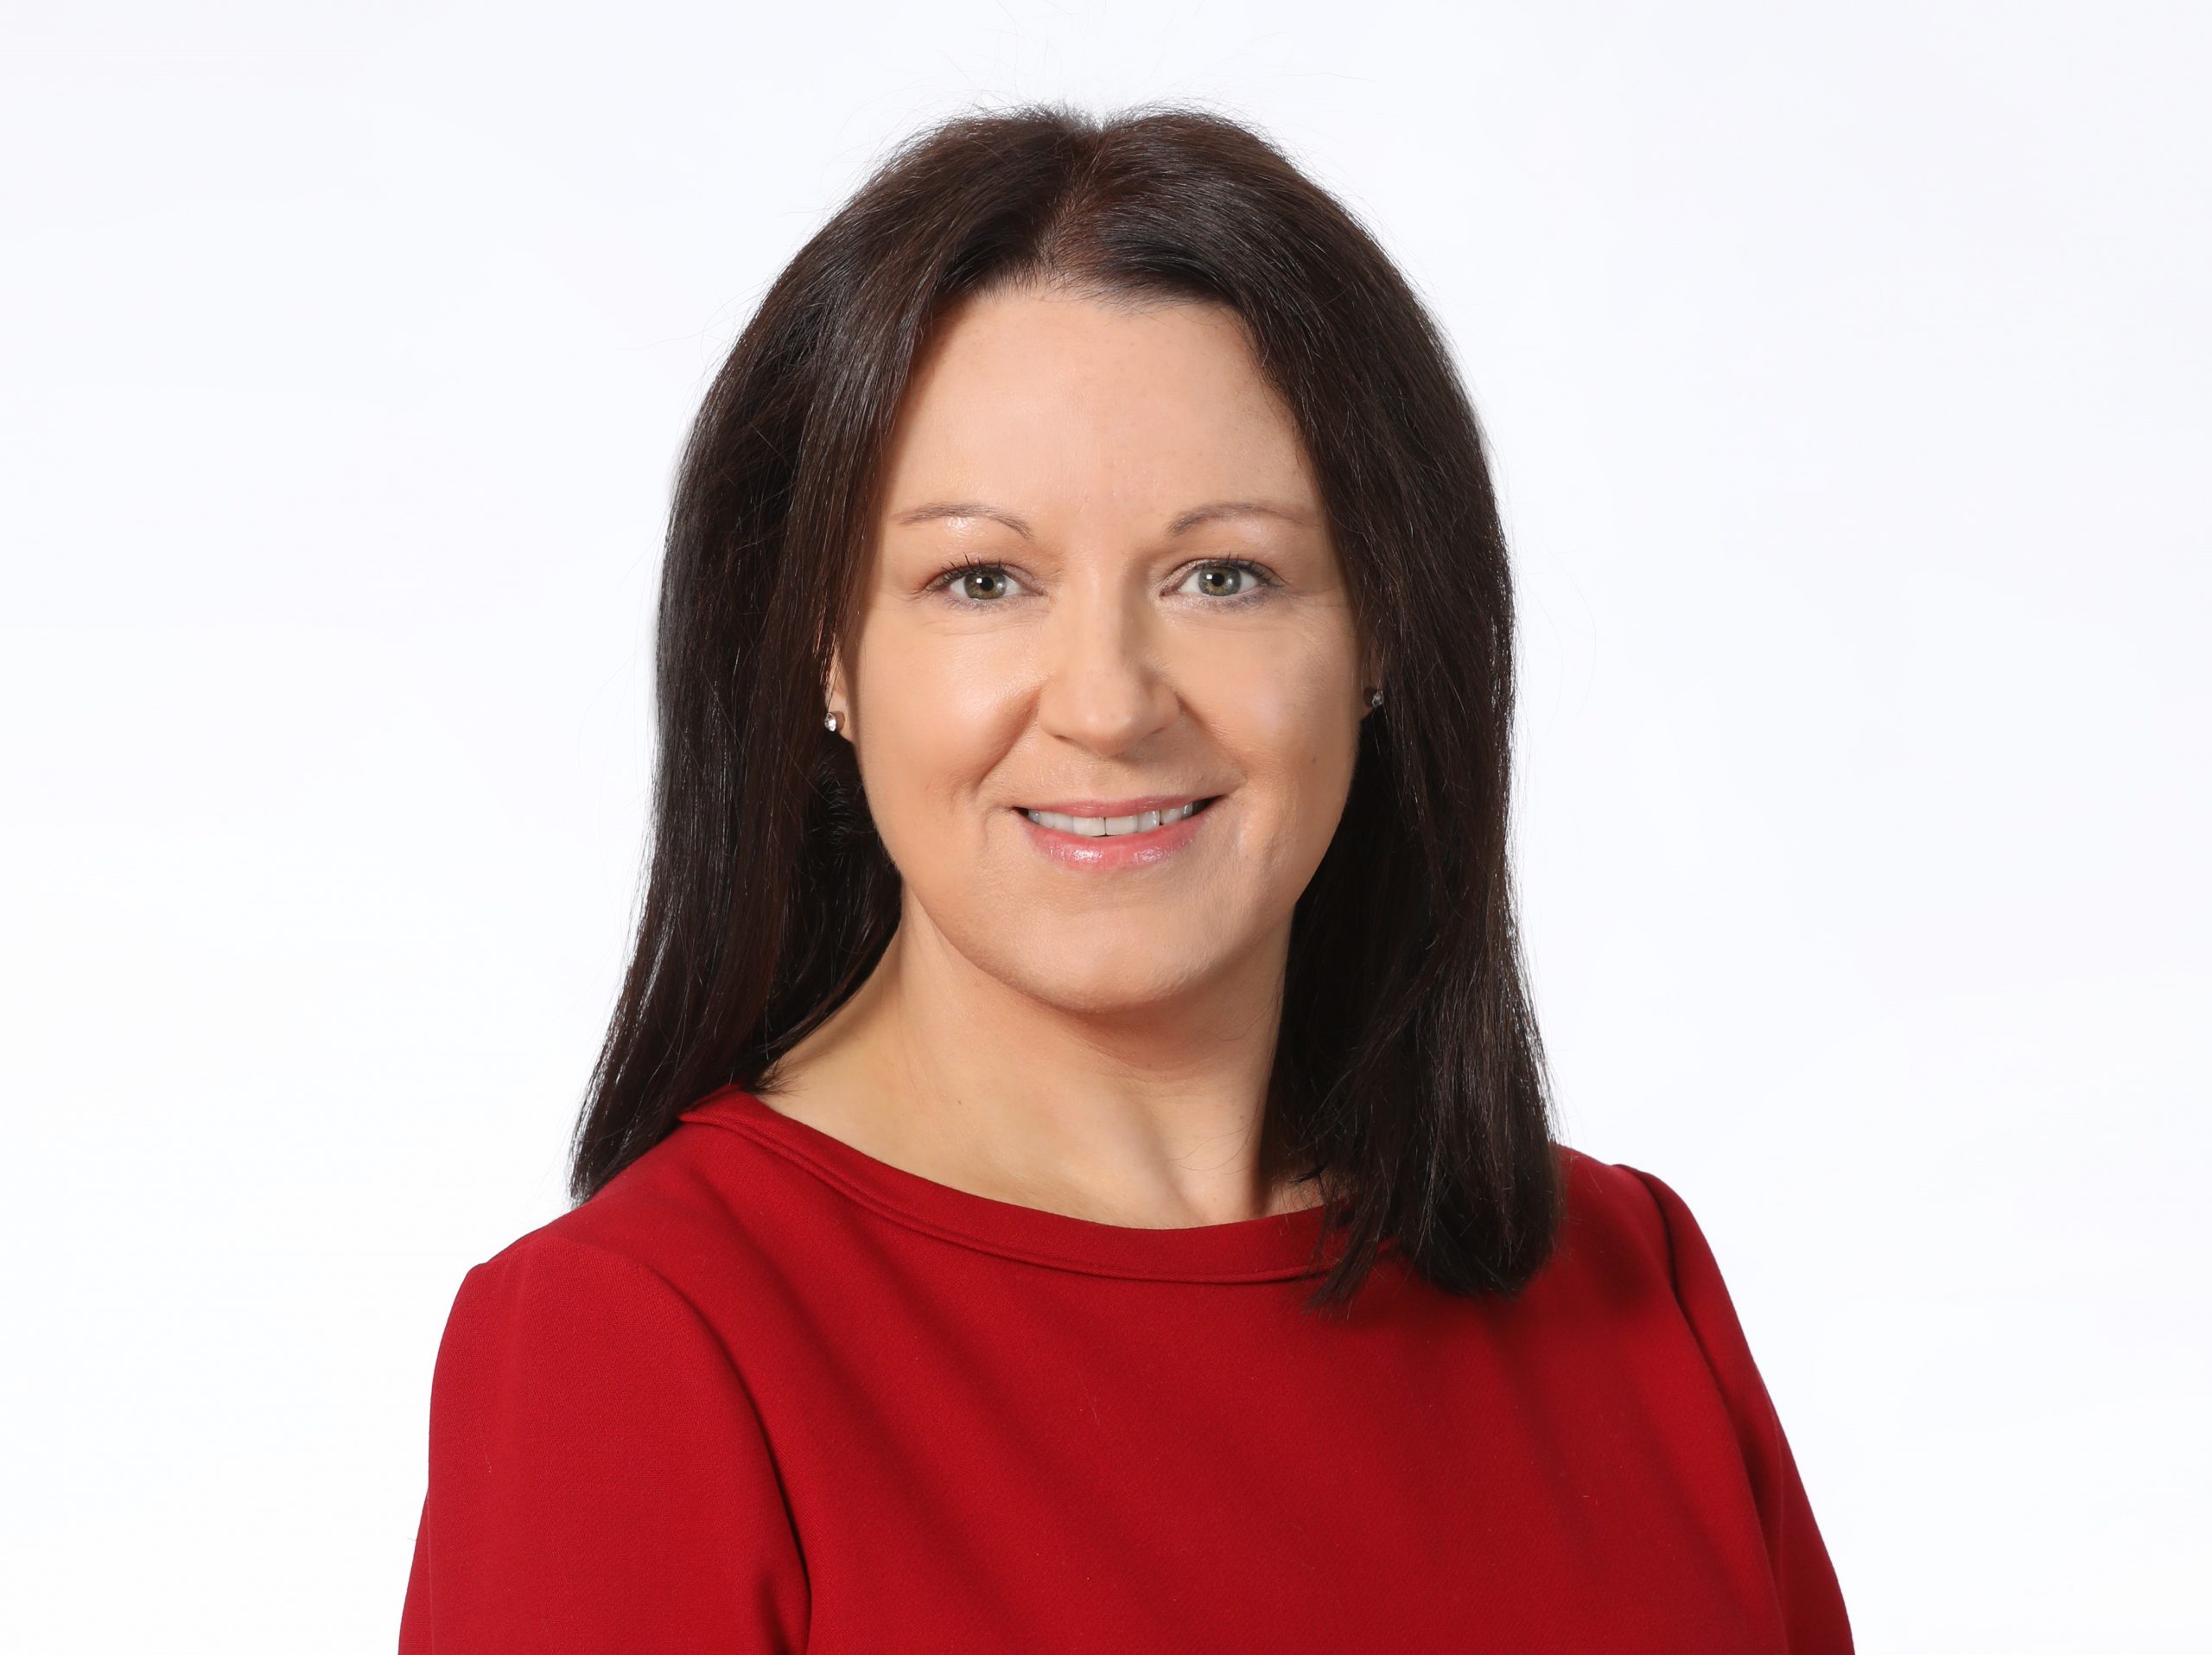 Vice President of HR at Smurfit Kappa, Sharon Whitehead